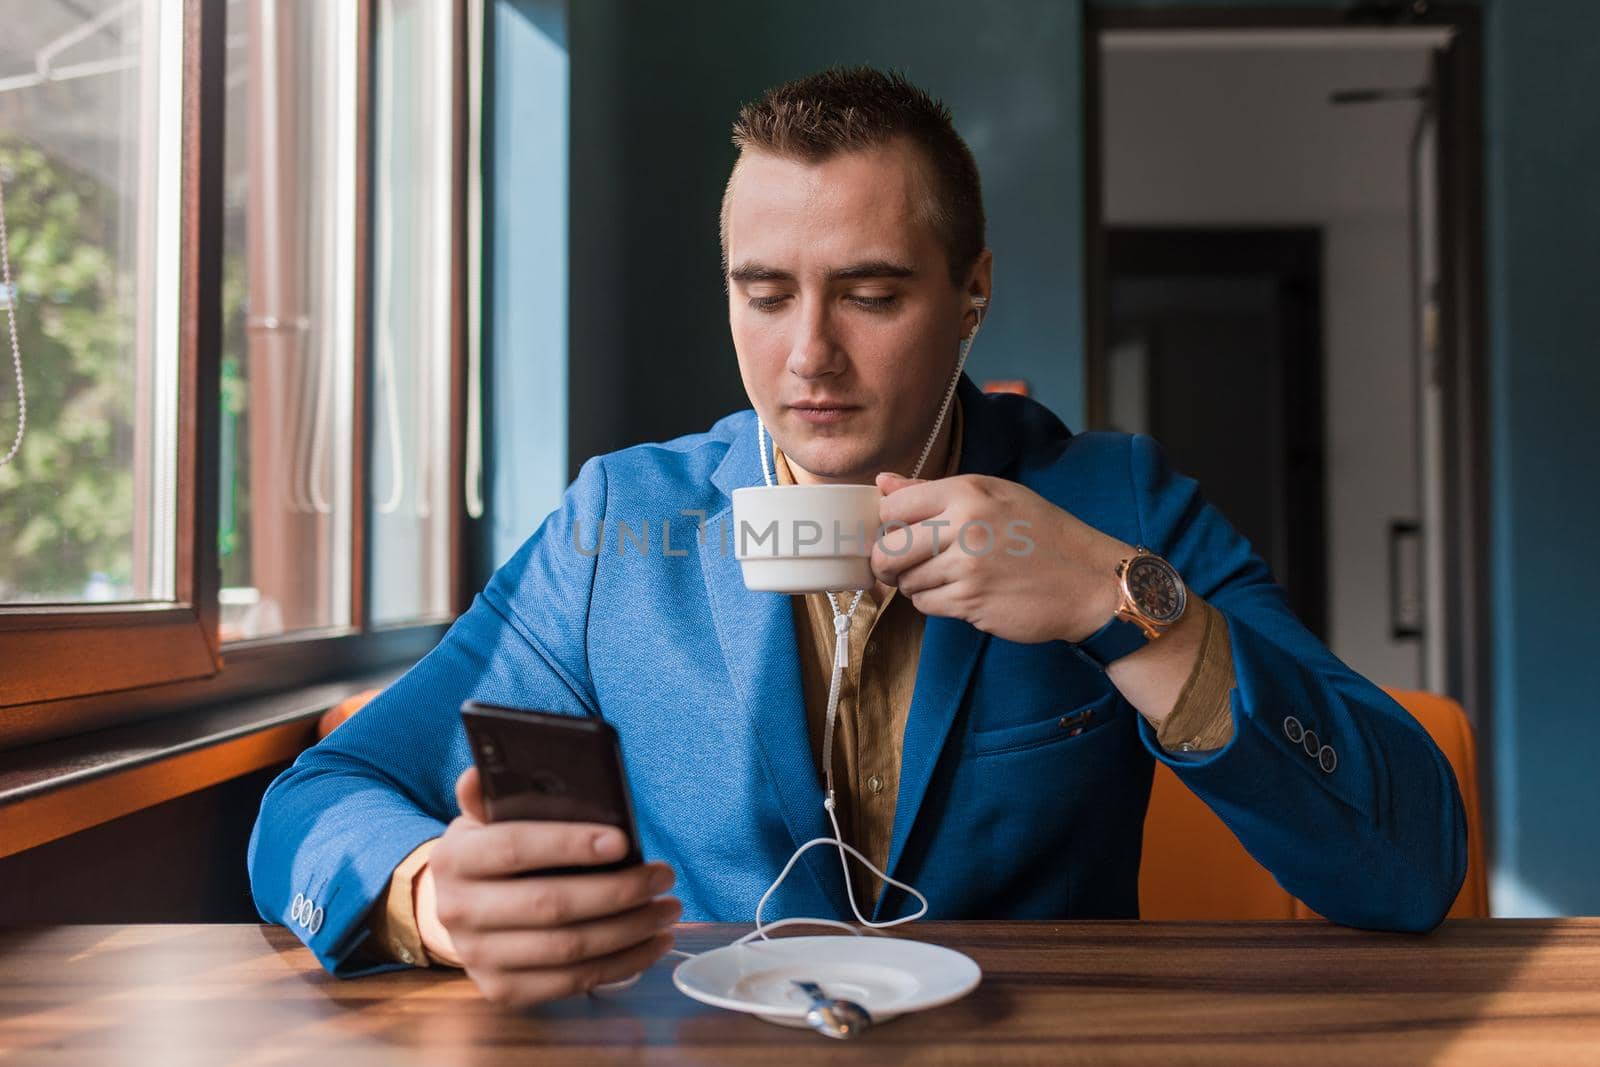 A young handsome guy businessman in blue jacket, of European appearance portrait, uses a smartphone or mobile phone sitting in a cafe at a table on a coffee break.